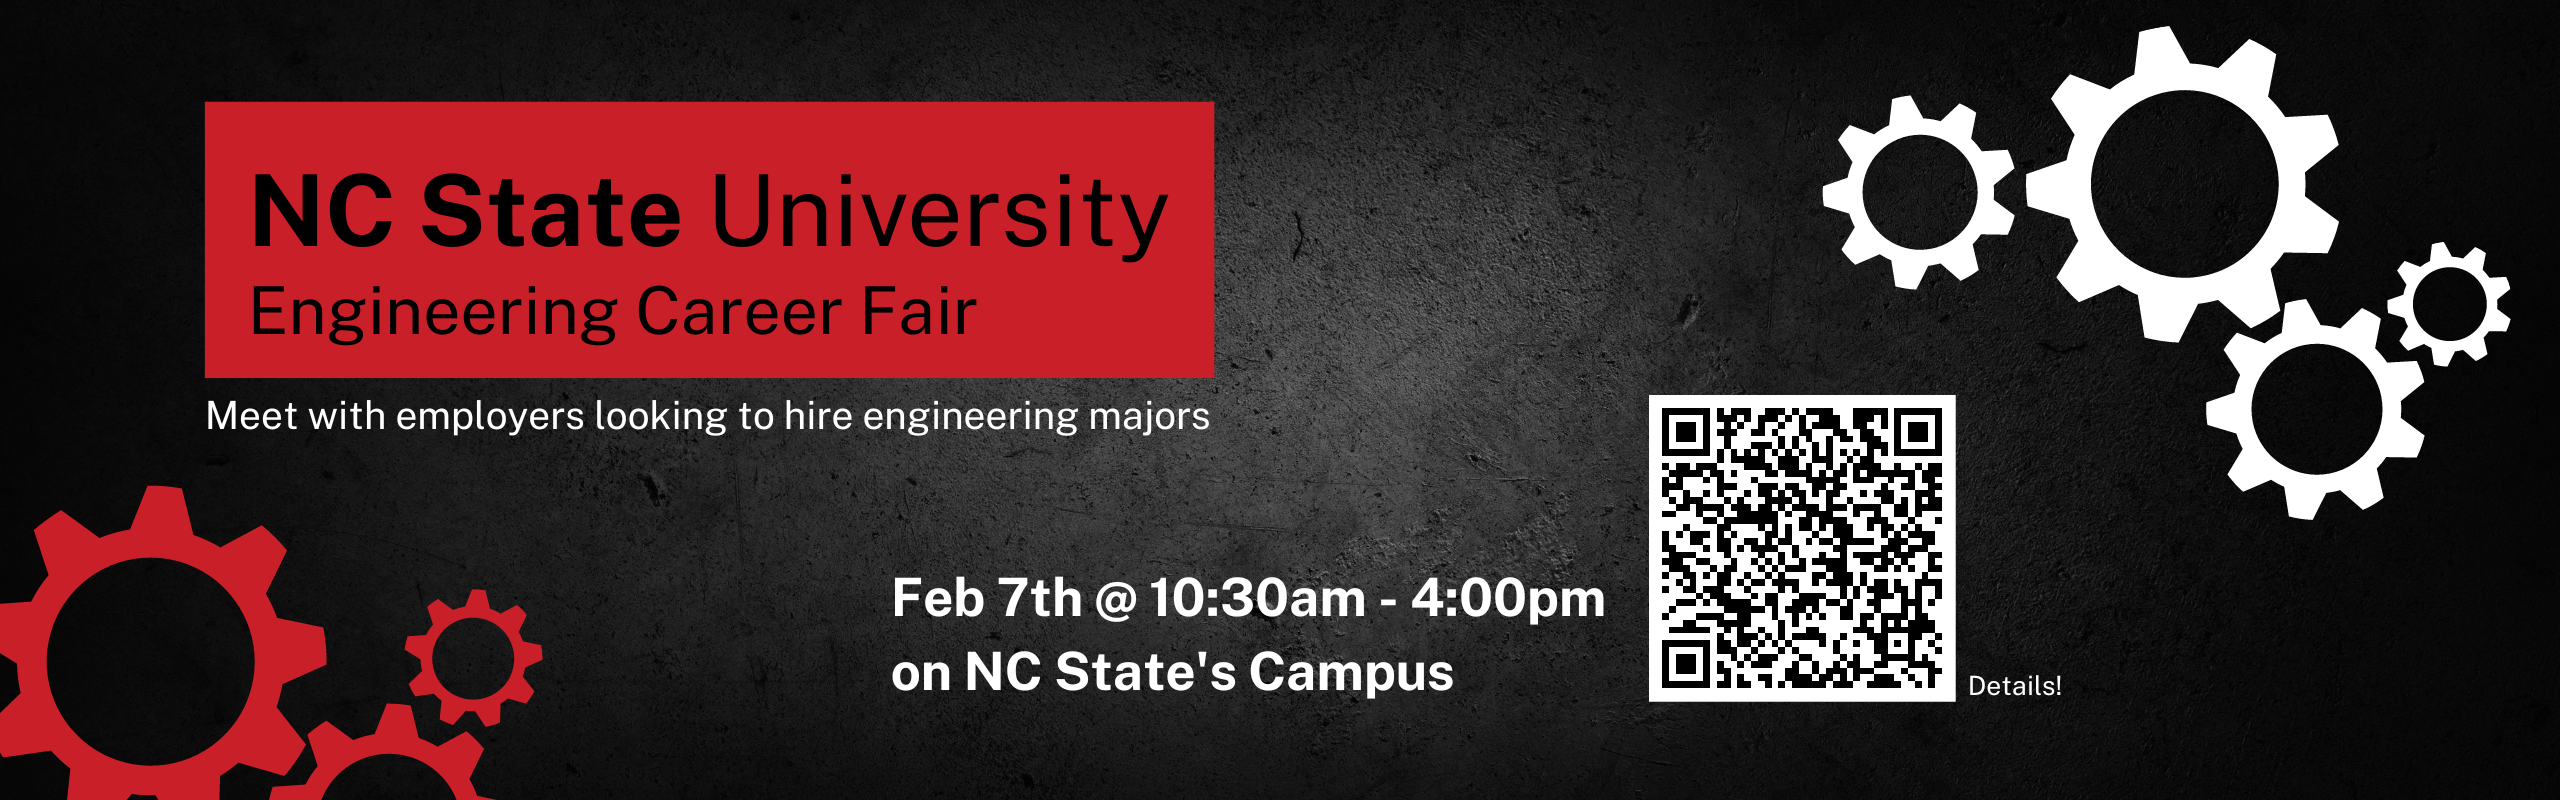 NC State Engineering Career Fair Feb 7 10:30 am - 4 pmReview Details on The Elon Job Network